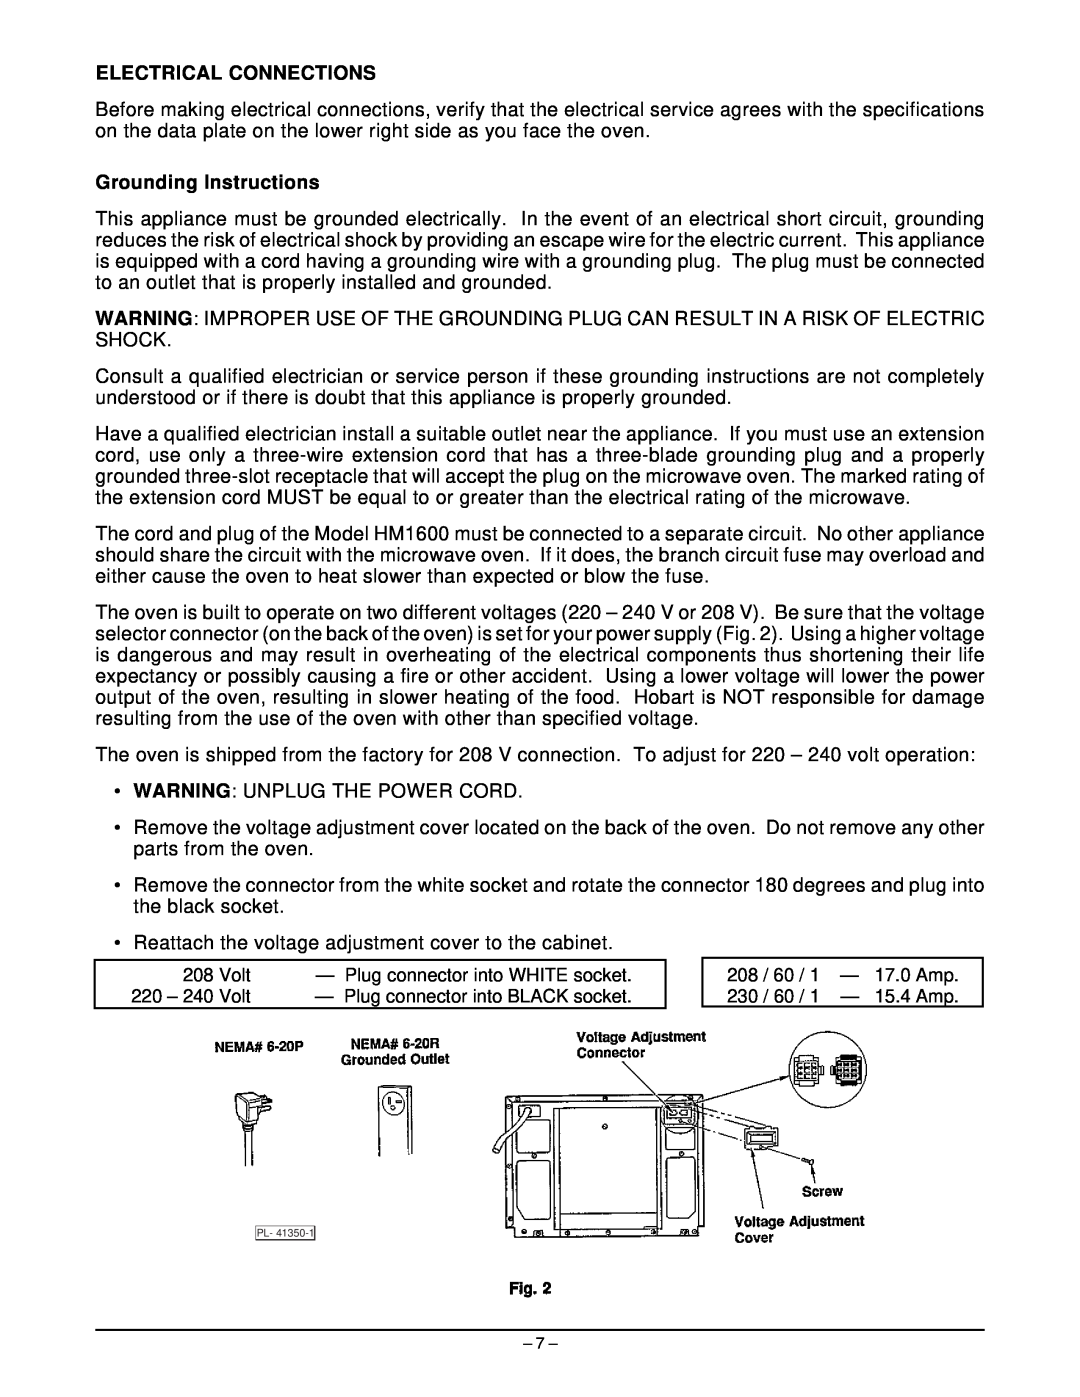 Hobart HM1600 manual Electrical Connections, Grounding Instructions 